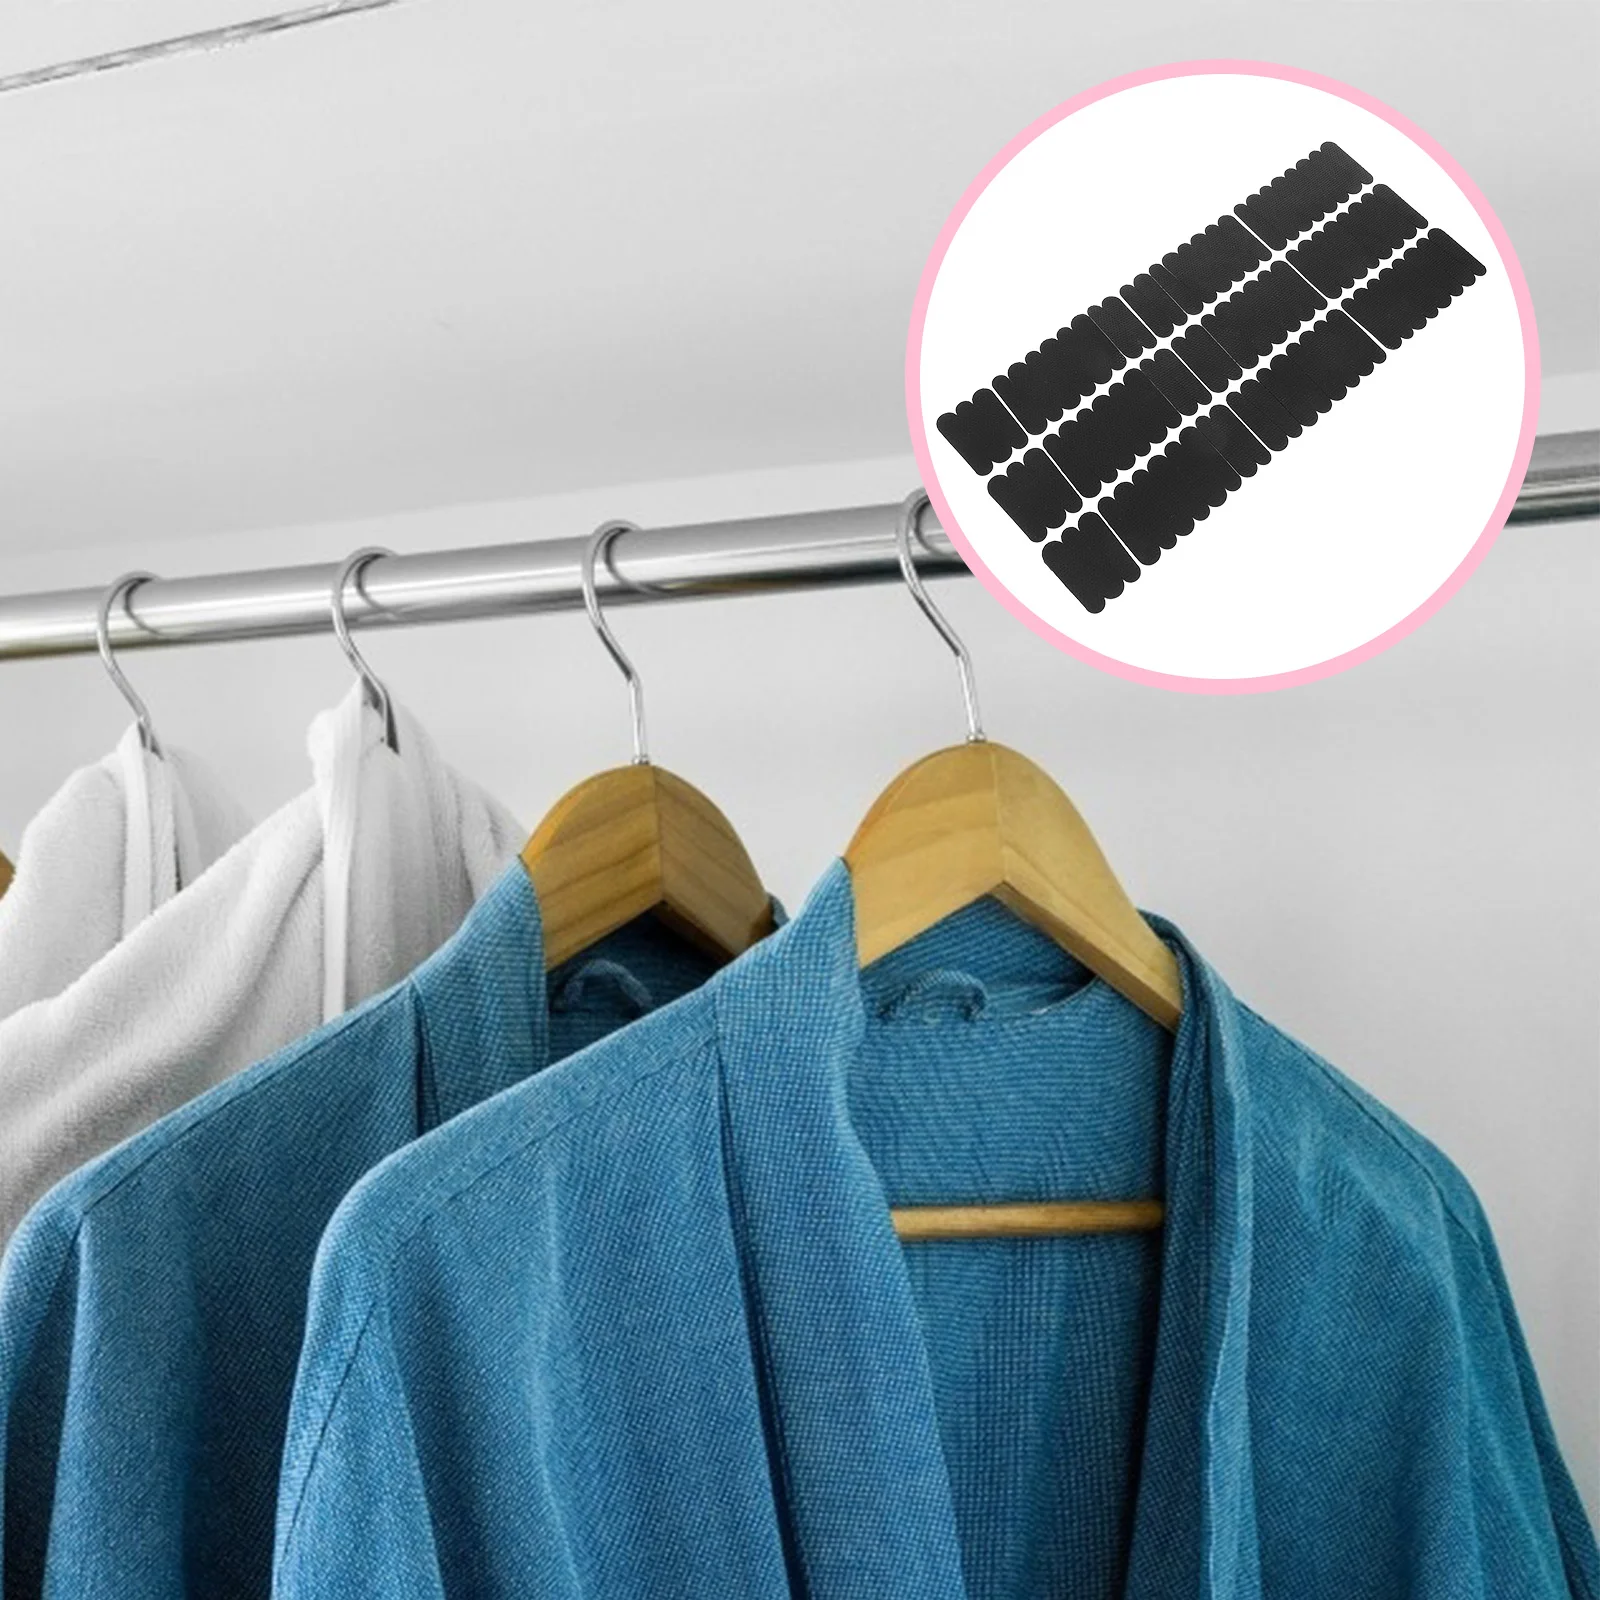 

100 Pcs Non-slip Hanger Grips Hangers Mat Clothing Strips Non-skid Silica Gel Clothes Adhesive